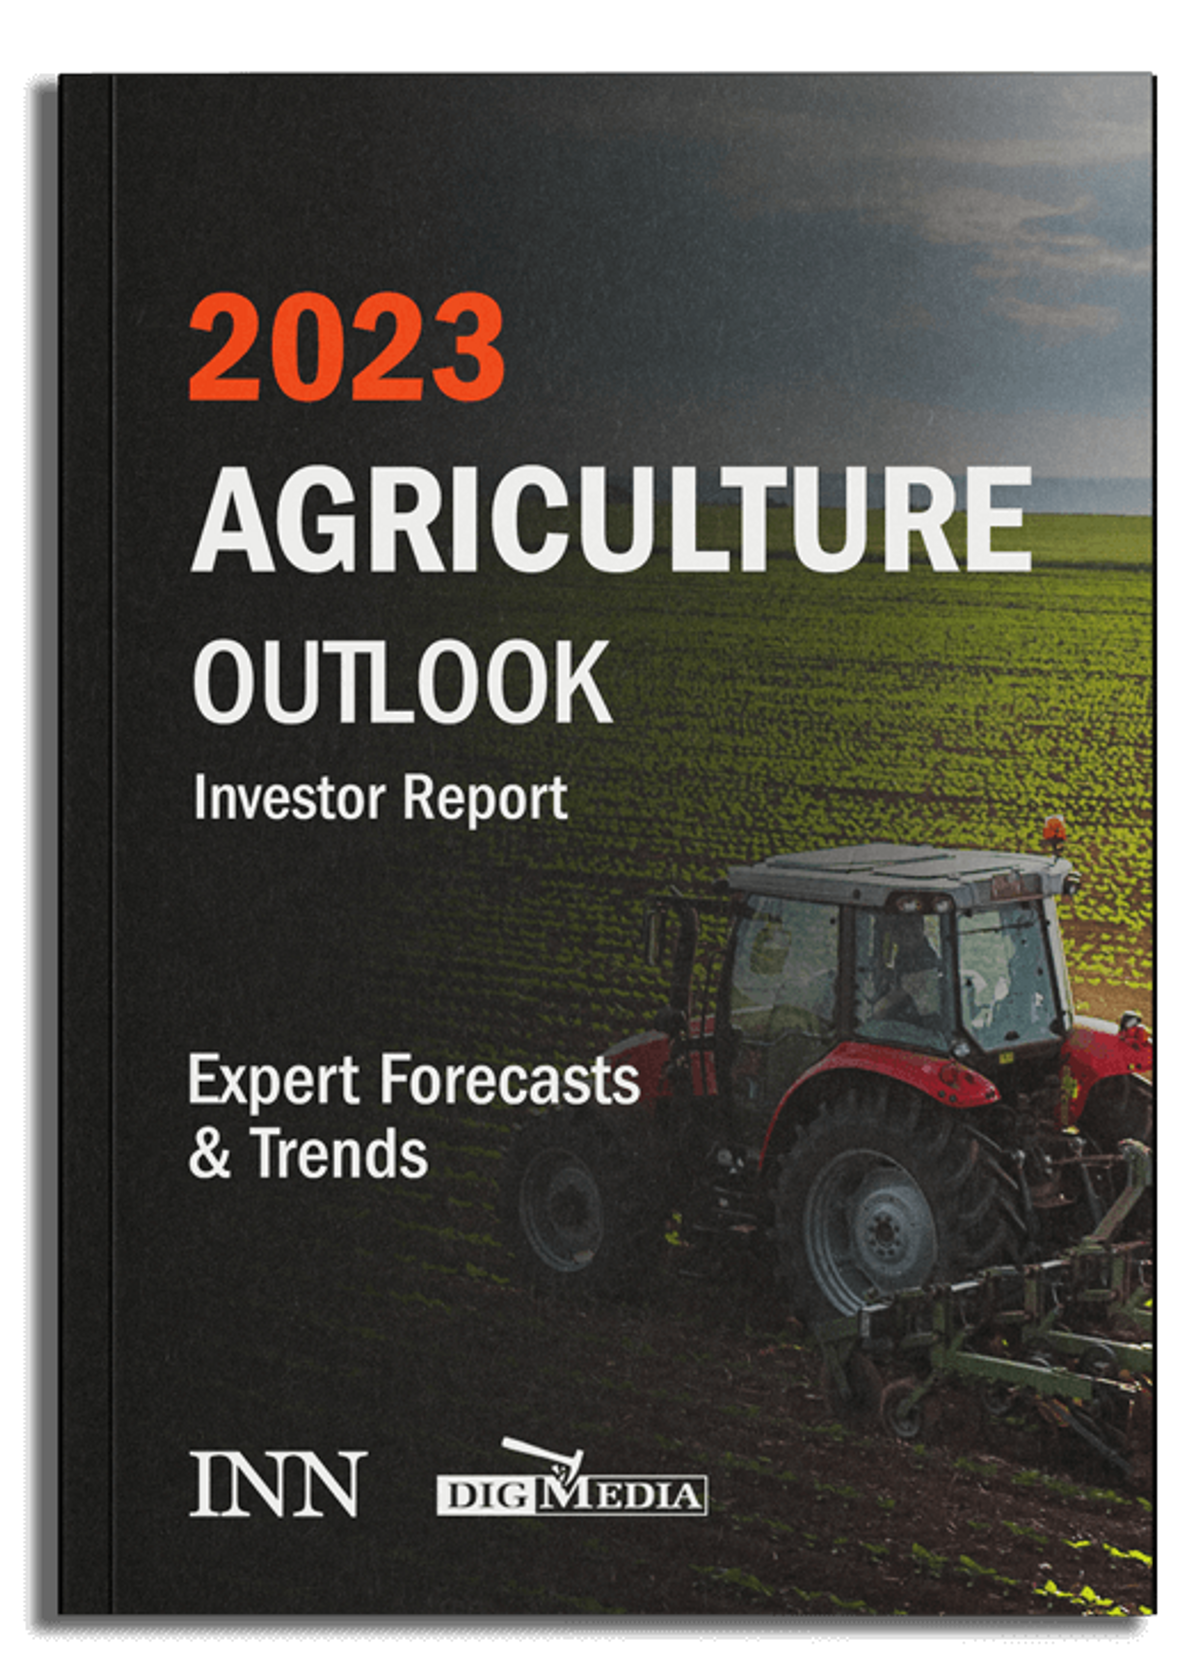 NEW! 2023 Agriculture Outlook Report